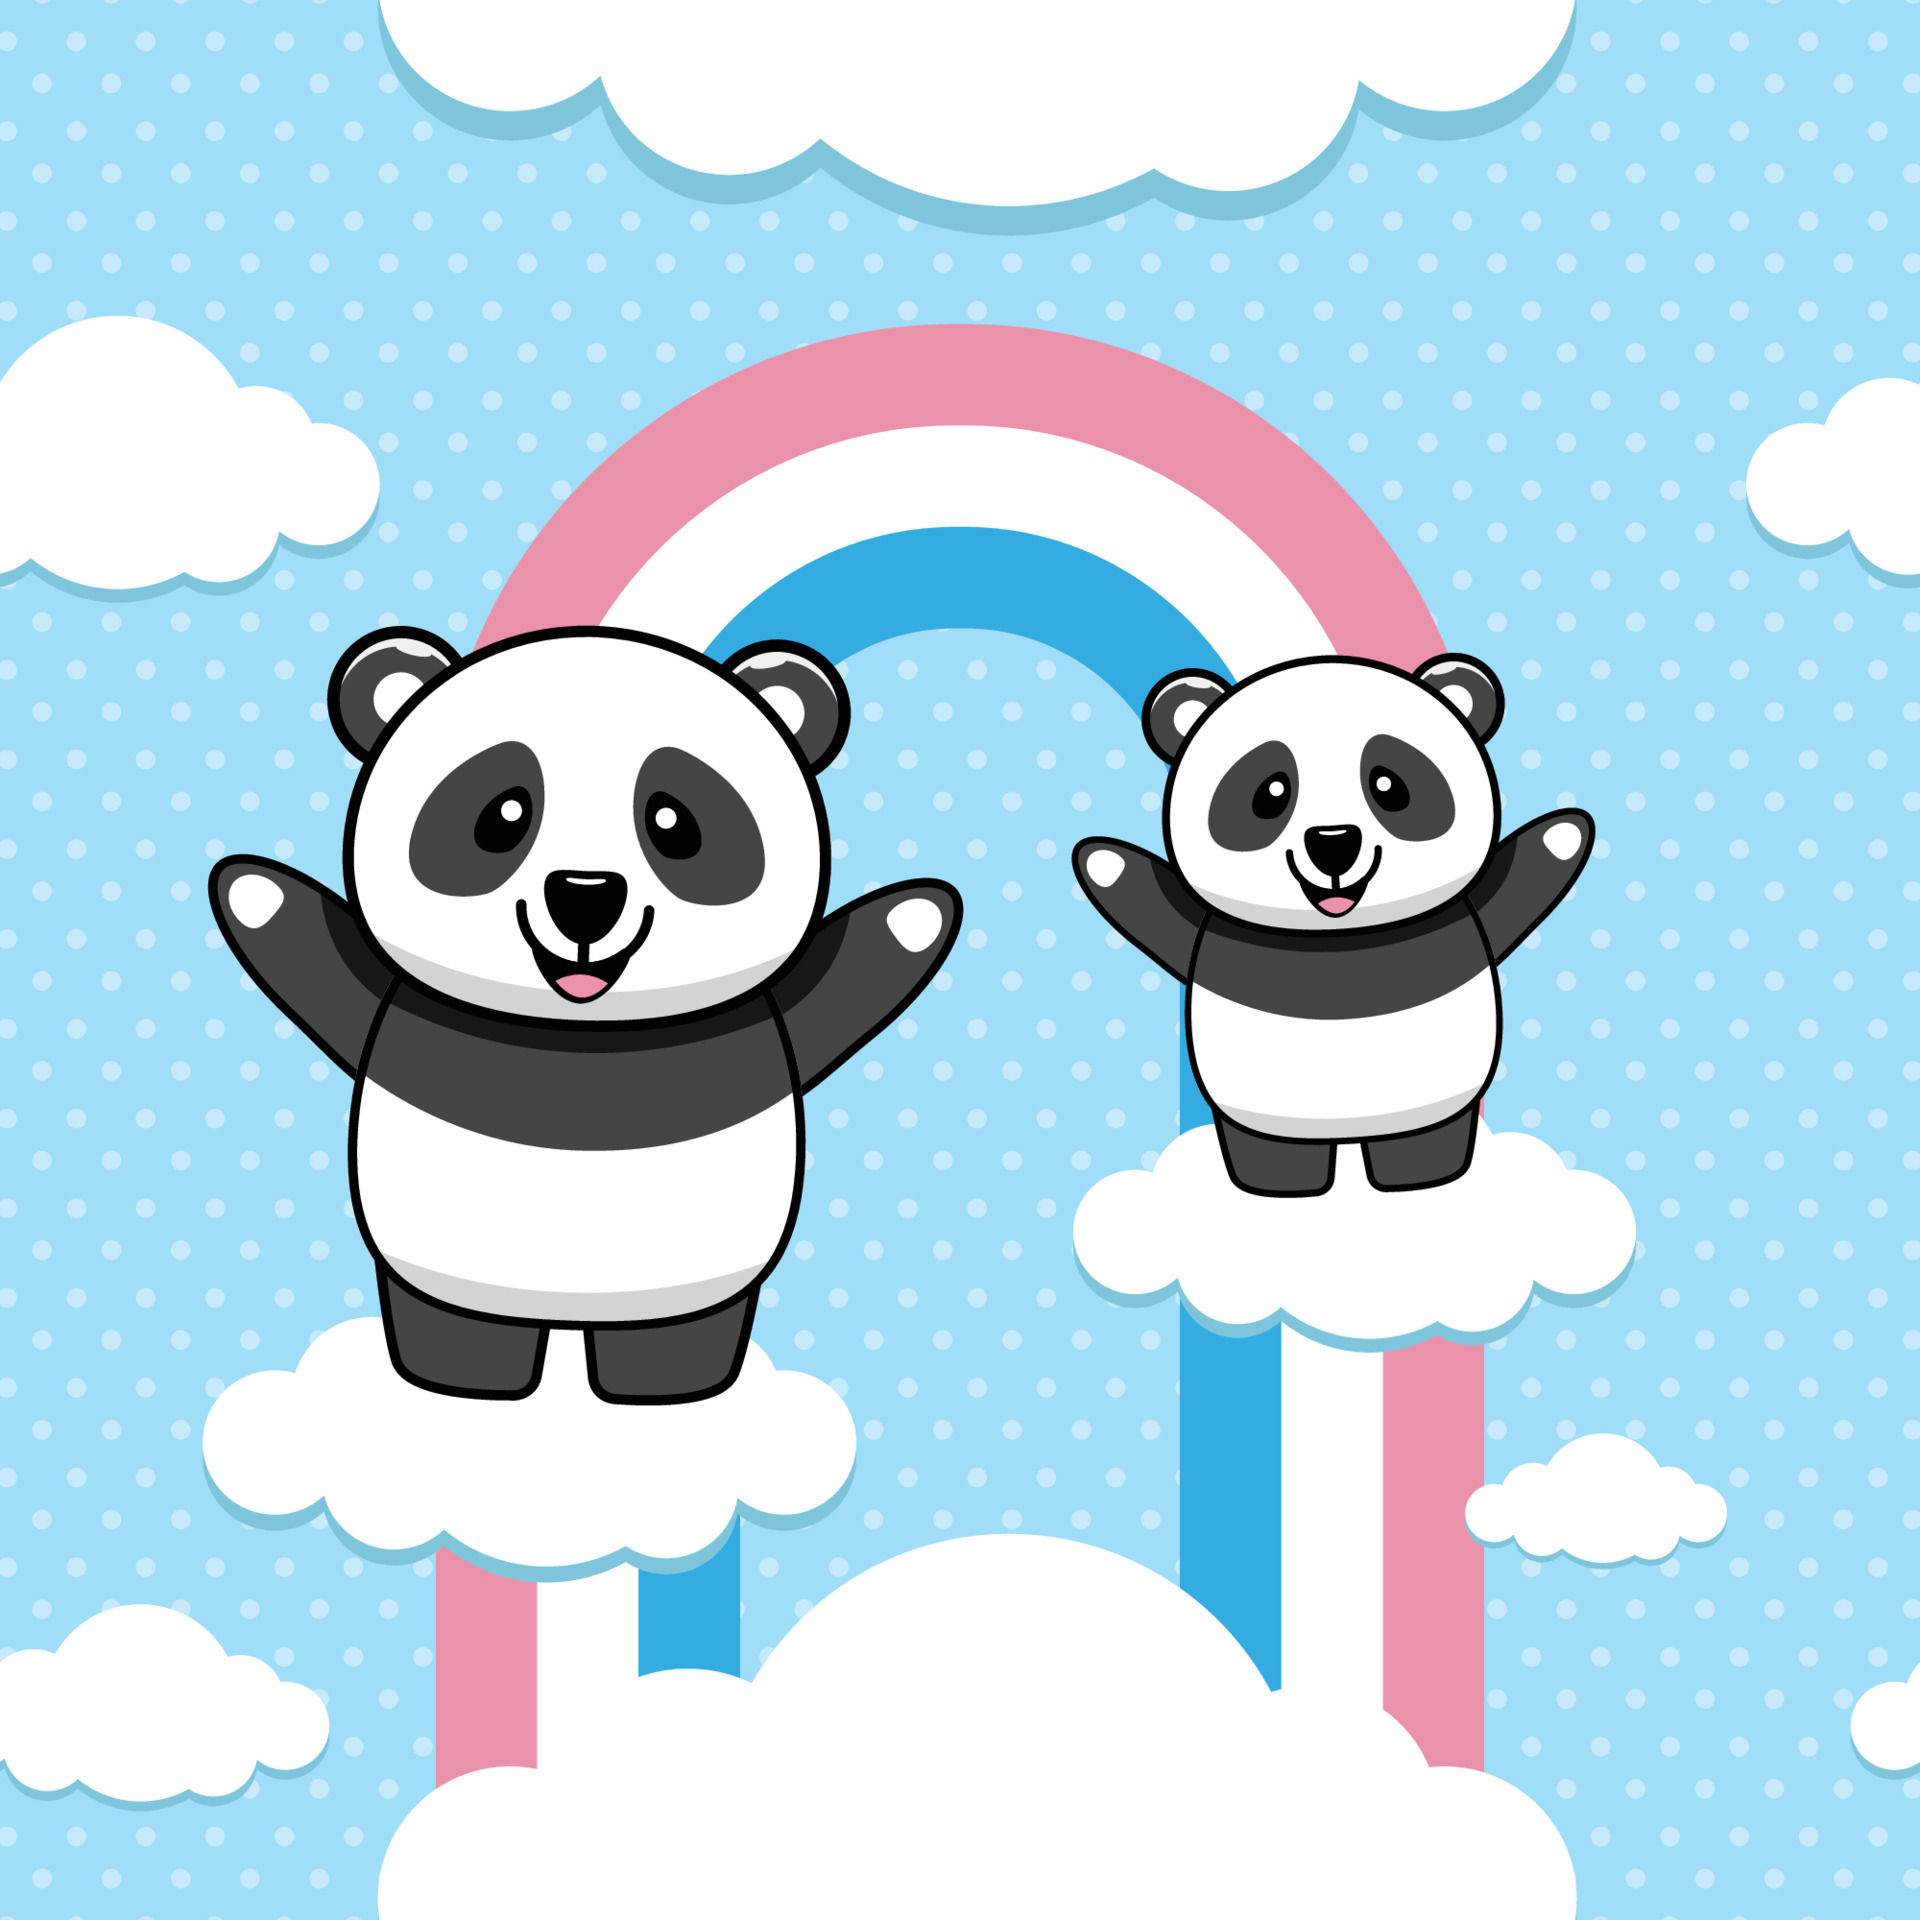 Cute panda character, cute smiling expression with raised hand, rainbow and  cloud background suitable for wallpaper, t-shirt and other design needs.  4609893 Vector Art at Vecteezy